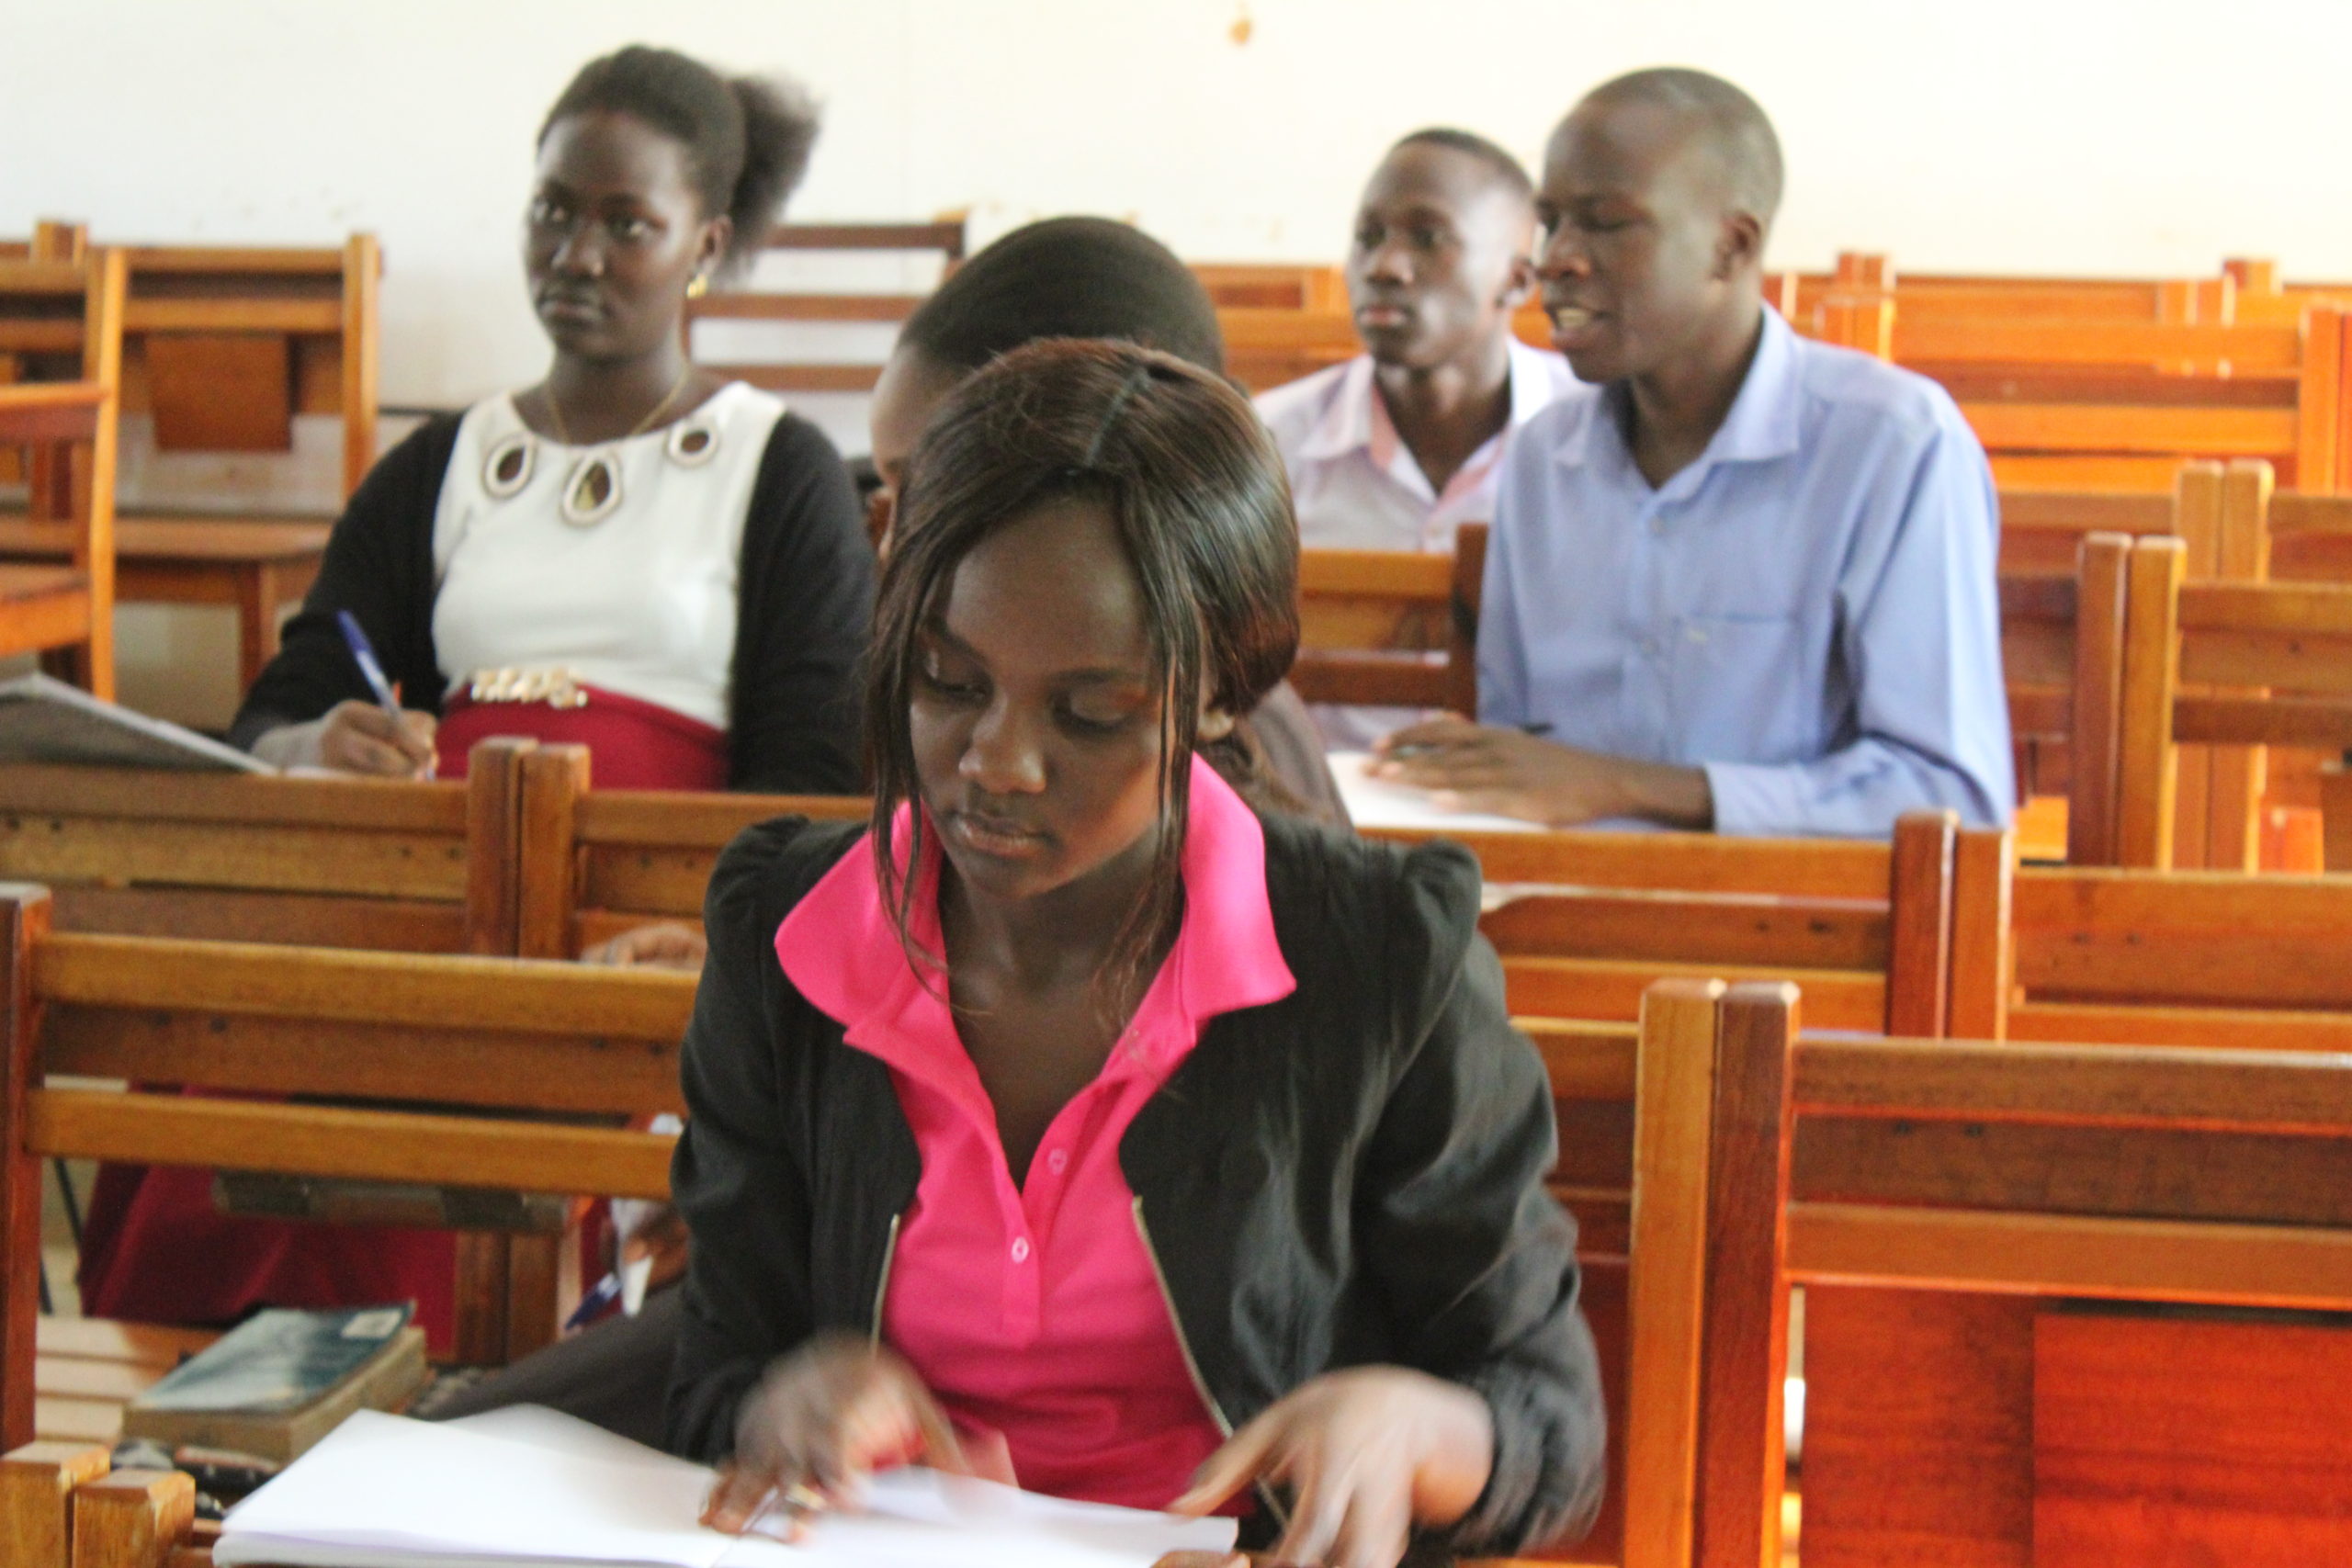 Students at Uganda Martyrs University, young woman in foreground, two young men and one young woman in backhground